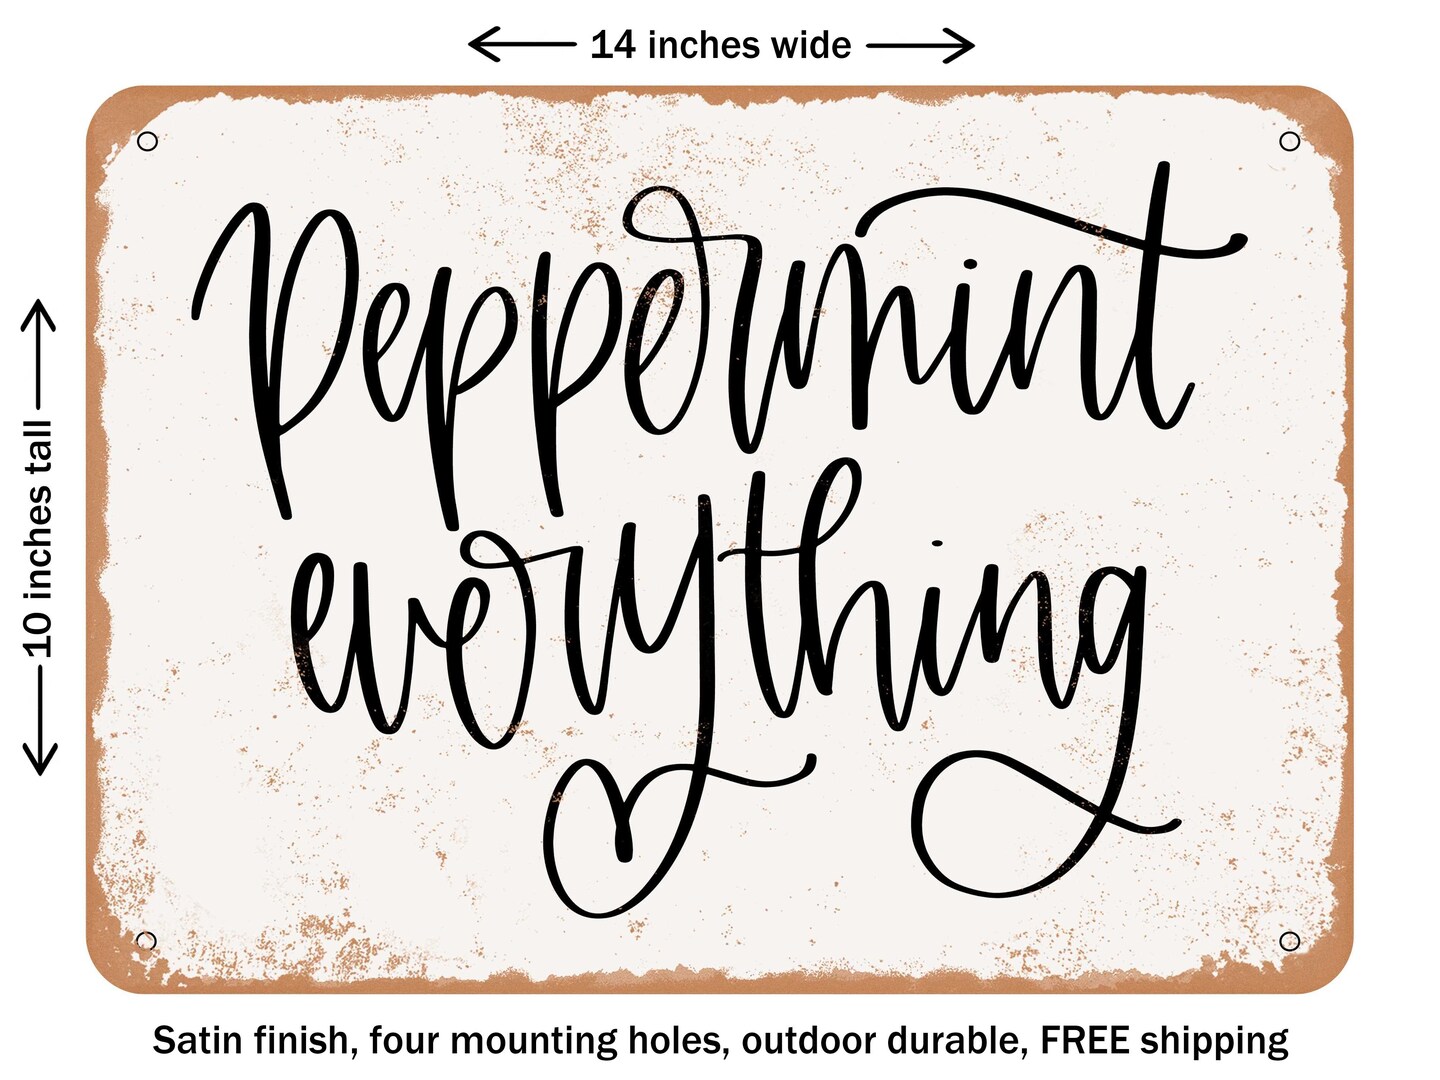 DECORATIVE METAL SIGN - Peppermint Everything - Vintage Rusty Look